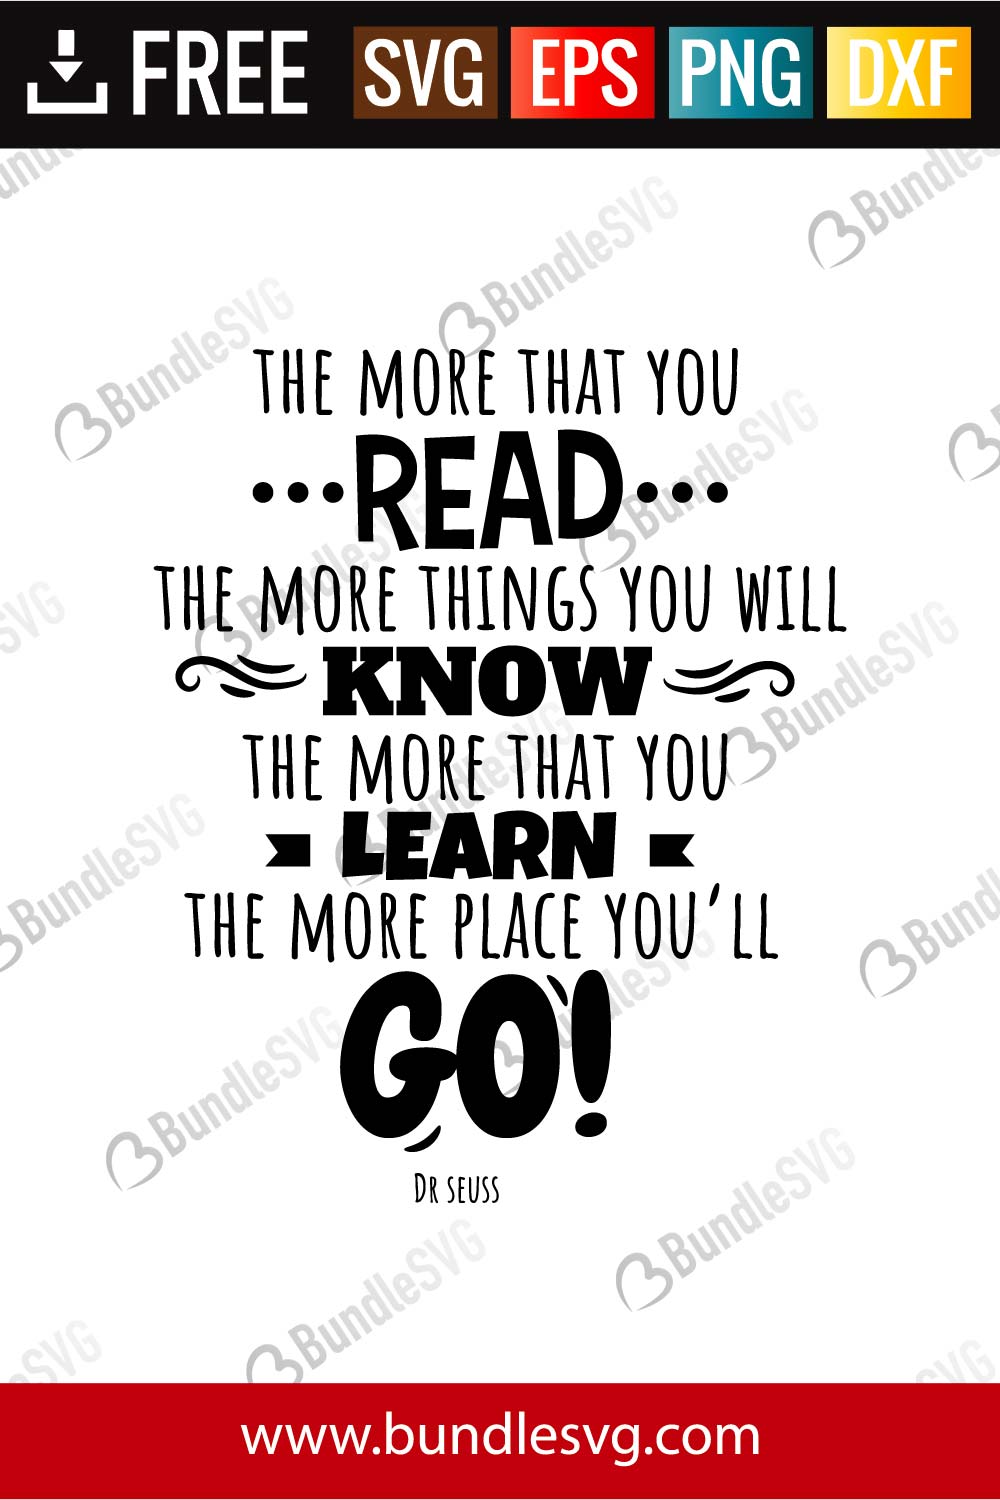 the-more-that-you-read-the-more-thing-you-will-know-the-more-you-learn